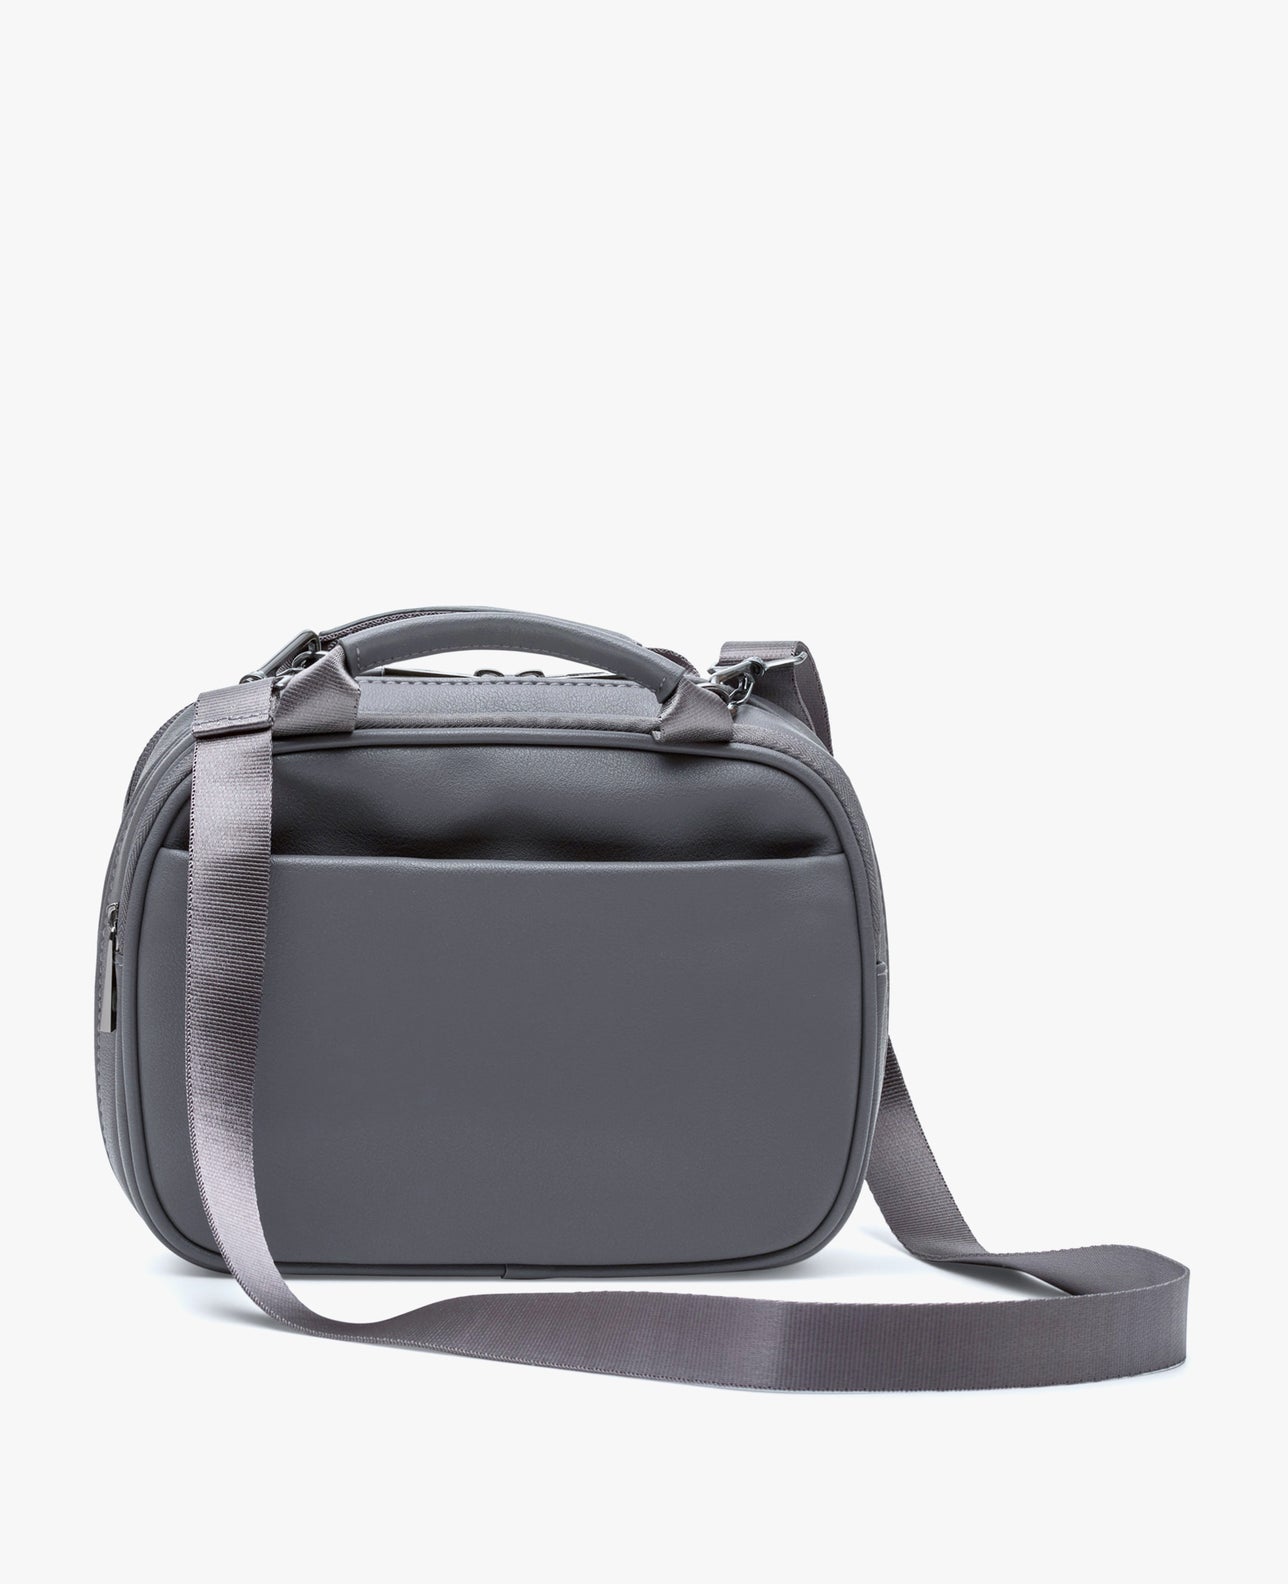 color:Charcoal Vegan Leather